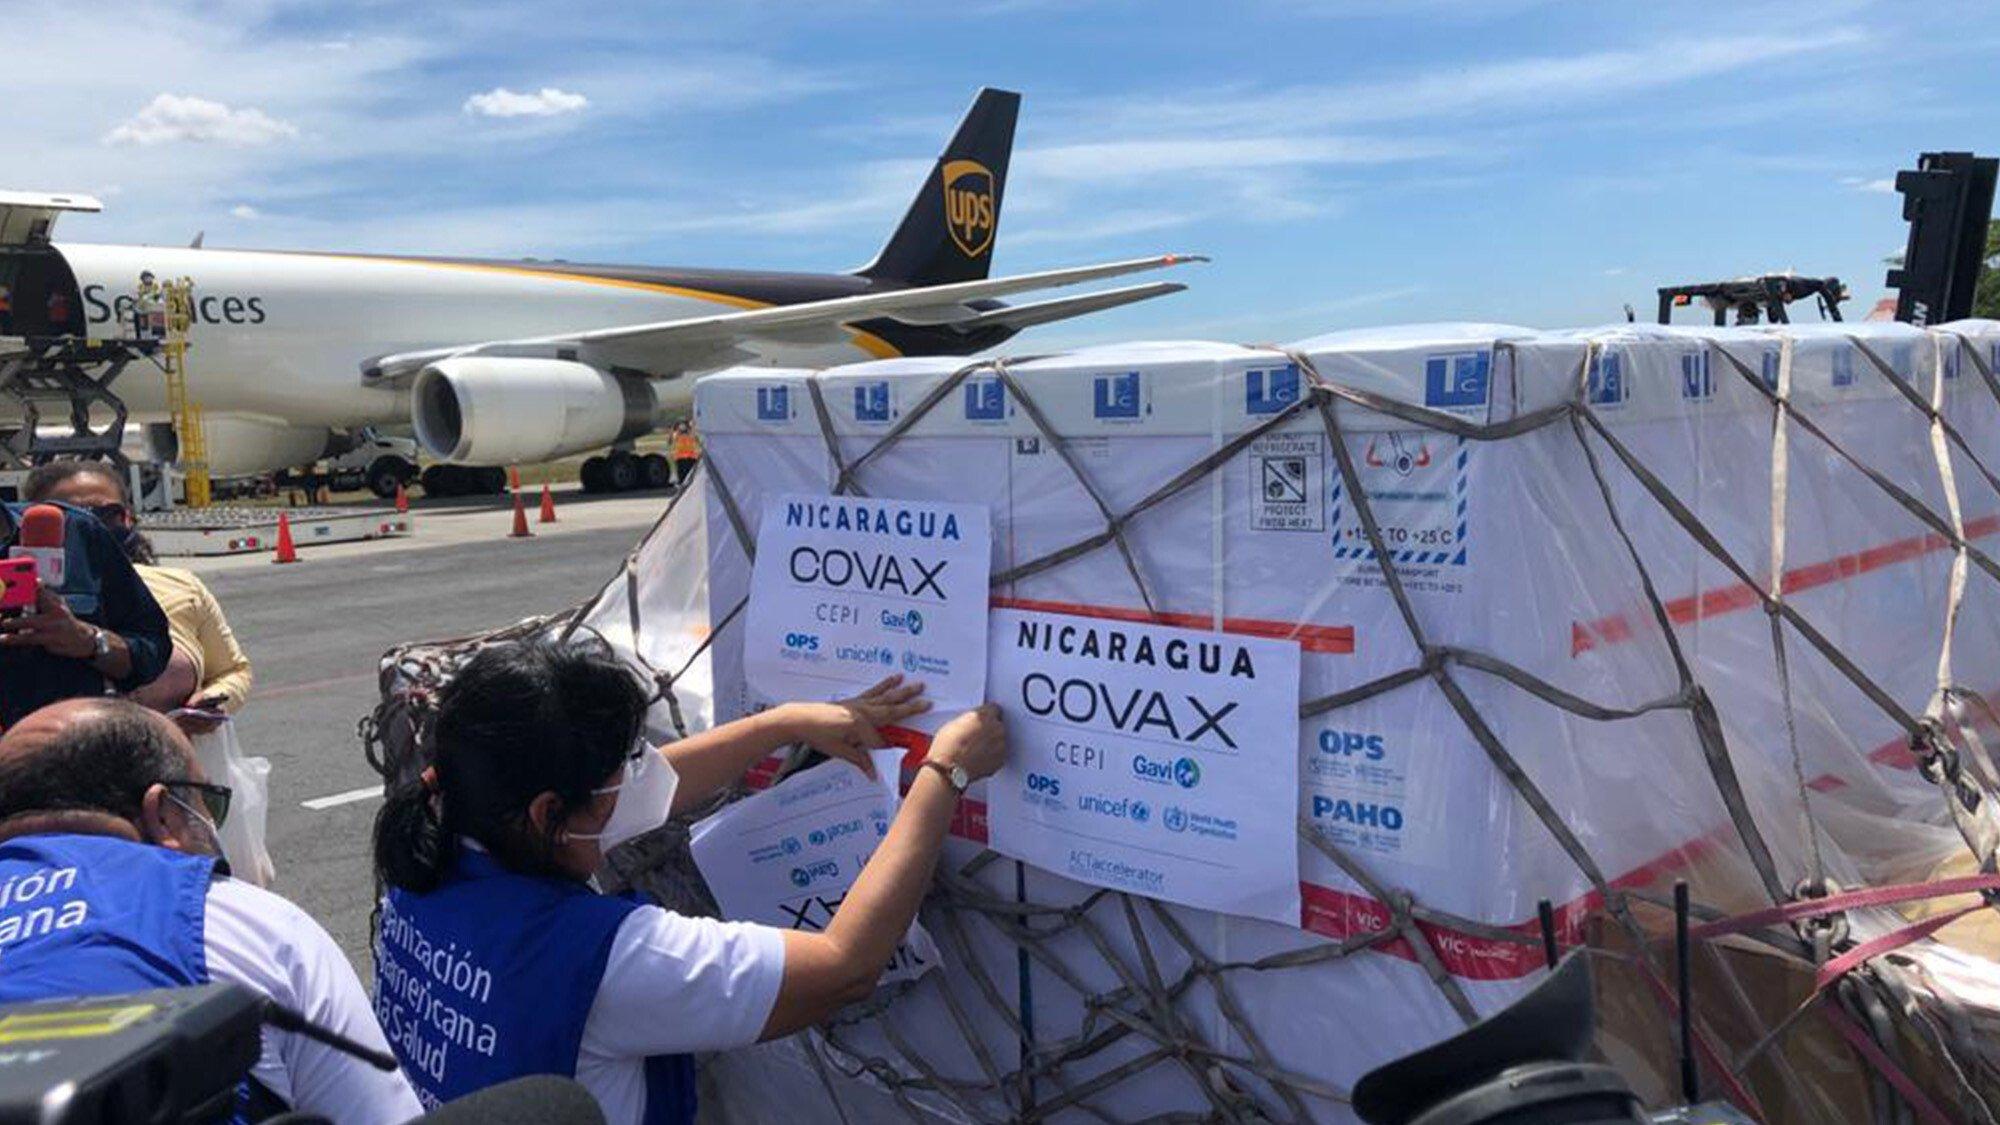 COVAX-supported Covid-19 vaccines arriving in Nicaragua in March 2021